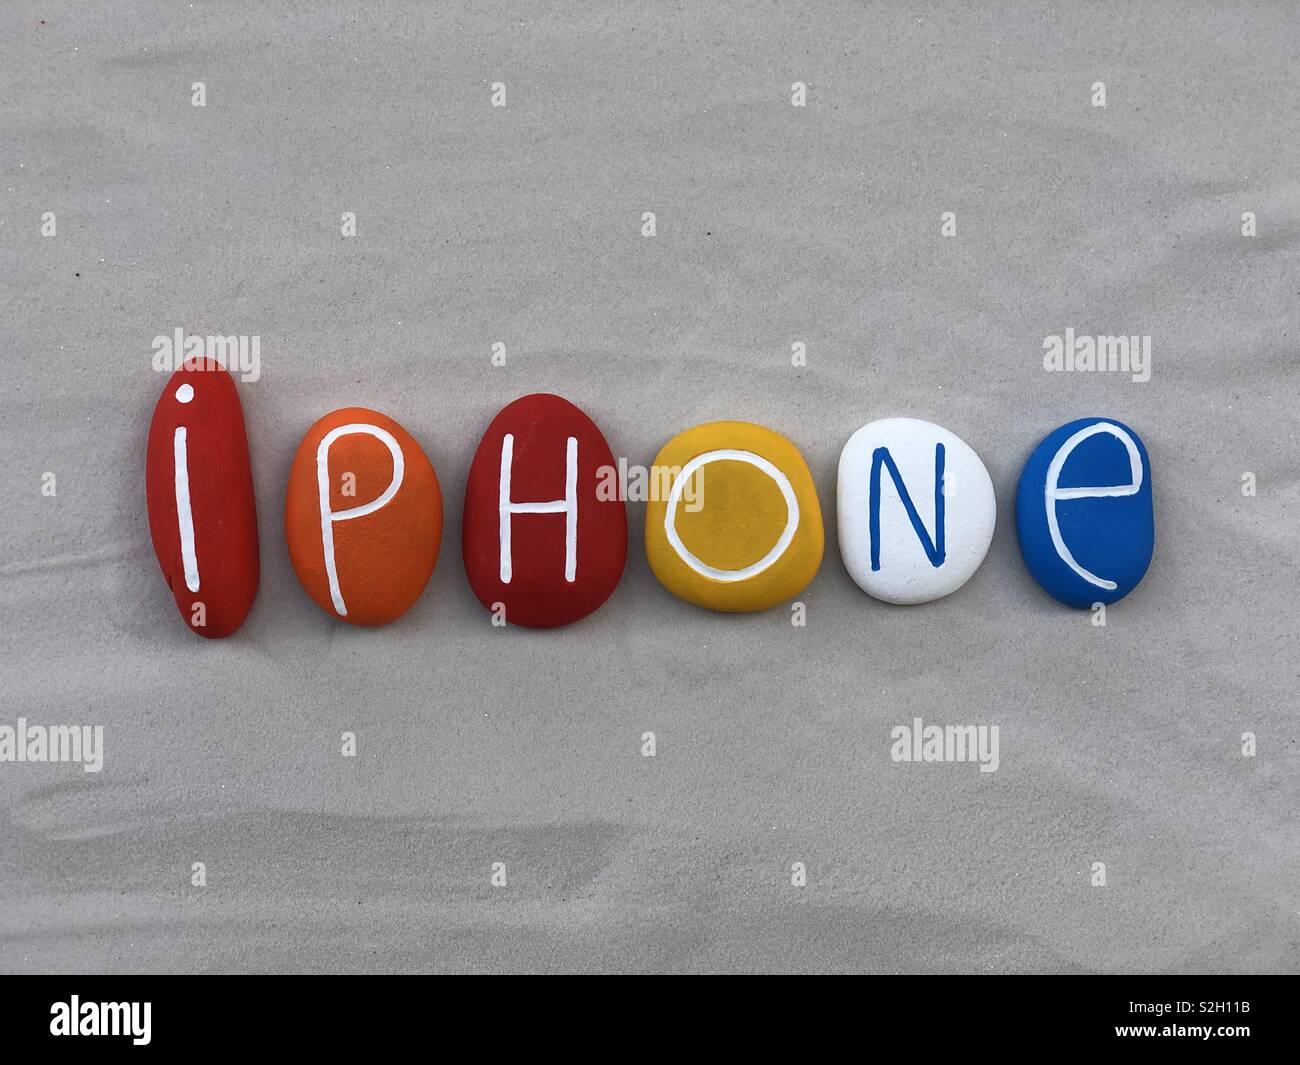 Iphone text with multi coloredsl stones over white sand Stock Photo